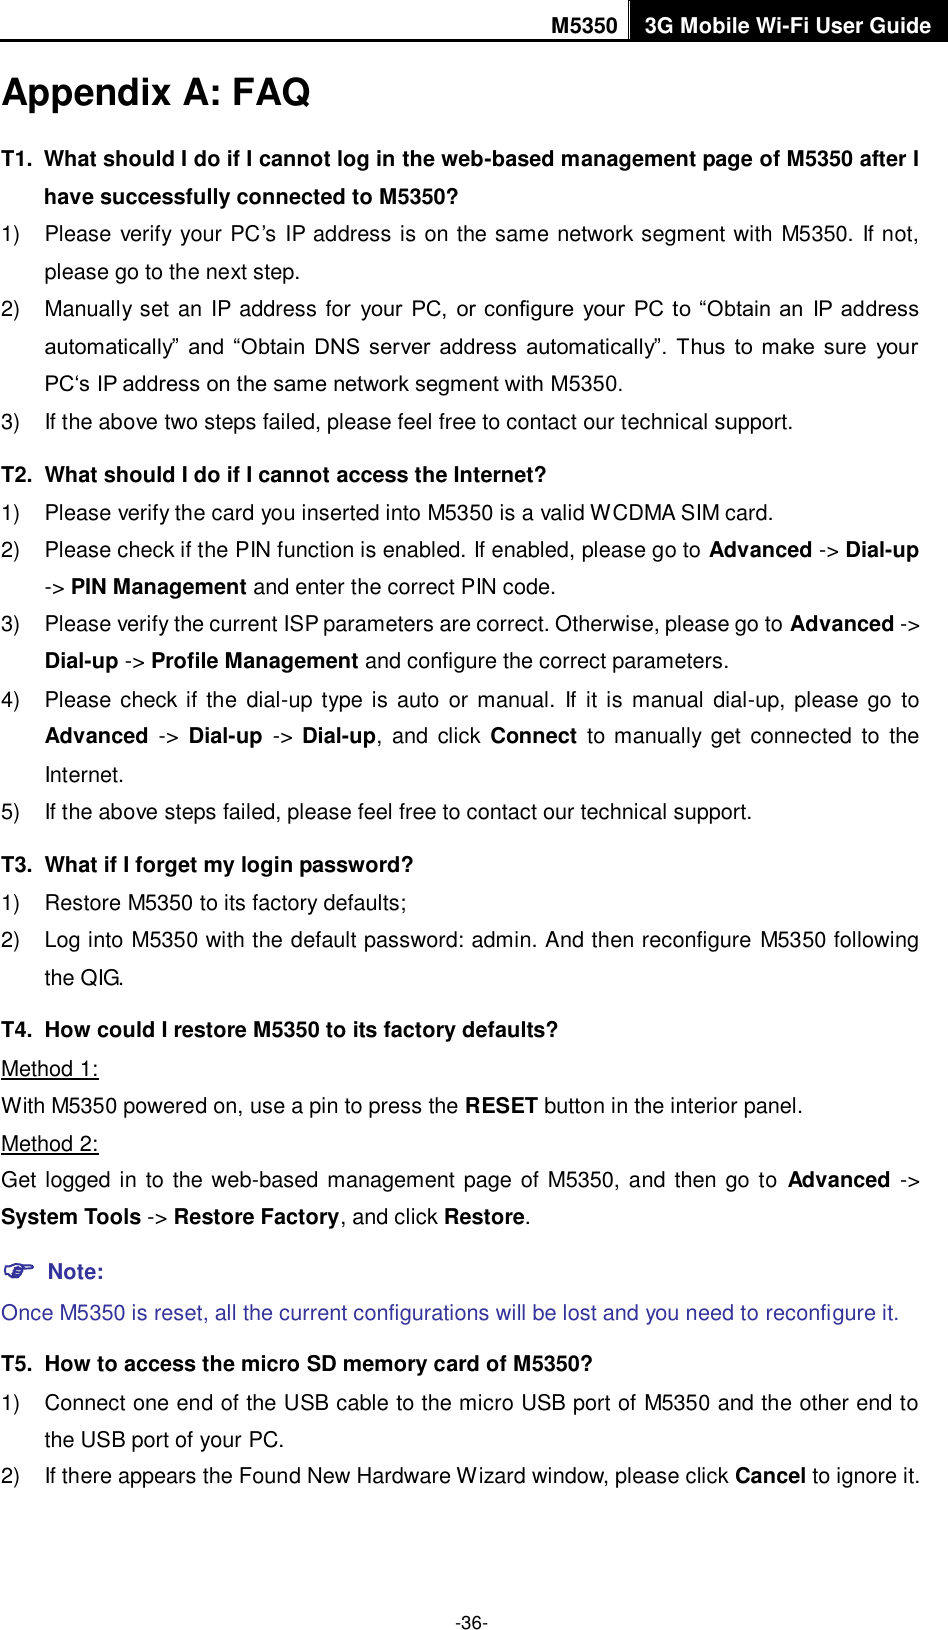 M5350 3G Mobile Wi-Fi User Guide  -36- Appendix A: FAQ T1.  What should I do if I cannot log in the web-based management page of M5350 after I have successfully connected to M5350? 1)  Please verify your PC‟s IP address is on the same network segment with M5350. If not, please go to the next step. 2)  Manually set an IP address for  your  PC,  or configure  your  PC to “Obtain an  IP address automatically”  and “Obtain  DNS  server  address  automatically”.  Thus  to  make sure  your PC„s IP address on the same network segment with M5350. 3)  If the above two steps failed, please feel free to contact our technical support.   T2.   What should I do if I cannot access the Internet? 1)  Please verify the card you inserted into M5350 is a valid WCDMA SIM card. 2)  Please check if the PIN function is enabled. If enabled, please go to Advanced -&gt; Dial-up -&gt; PIN Management and enter the correct PIN code. 3)  Please verify the current ISP parameters are correct. Otherwise, please go to Advanced -&gt; Dial-up -&gt; Profile Management and configure the correct parameters.     4)  Please check if  the  dial-up type is auto or  manual.  If it is manual dial-up, please go  to Advanced  -&gt;  Dial-up  -&gt;  Dial-up,  and  click  Connect  to manually  get  connected  to  the Internet. 5)  If the above steps failed, please feel free to contact our technical support. T3.   What if I forget my login password? 1)  Restore M5350 to its factory defaults; 2)  Log into M5350 with the default password: admin. And then reconfigure M5350 following the QIG. T4.   How could I restore M5350 to its factory defaults? Method 1: With M5350 powered on, use a pin to press the RESET button in the interior panel. Method 2: Get logged in to the web-based management page of M5350, and then go to  Advanced -&gt; System Tools -&gt; Restore Factory, and click Restore.  Note:   Once M5350 is reset, all the current configurations will be lost and you need to reconfigure it. T5.   How to access the micro SD memory card of M5350? 1)  Connect one end of the USB cable to the micro USB port of M5350 and the other end to the USB port of your PC. 2)  If there appears the Found New Hardware Wizard window, please click Cancel to ignore it. 